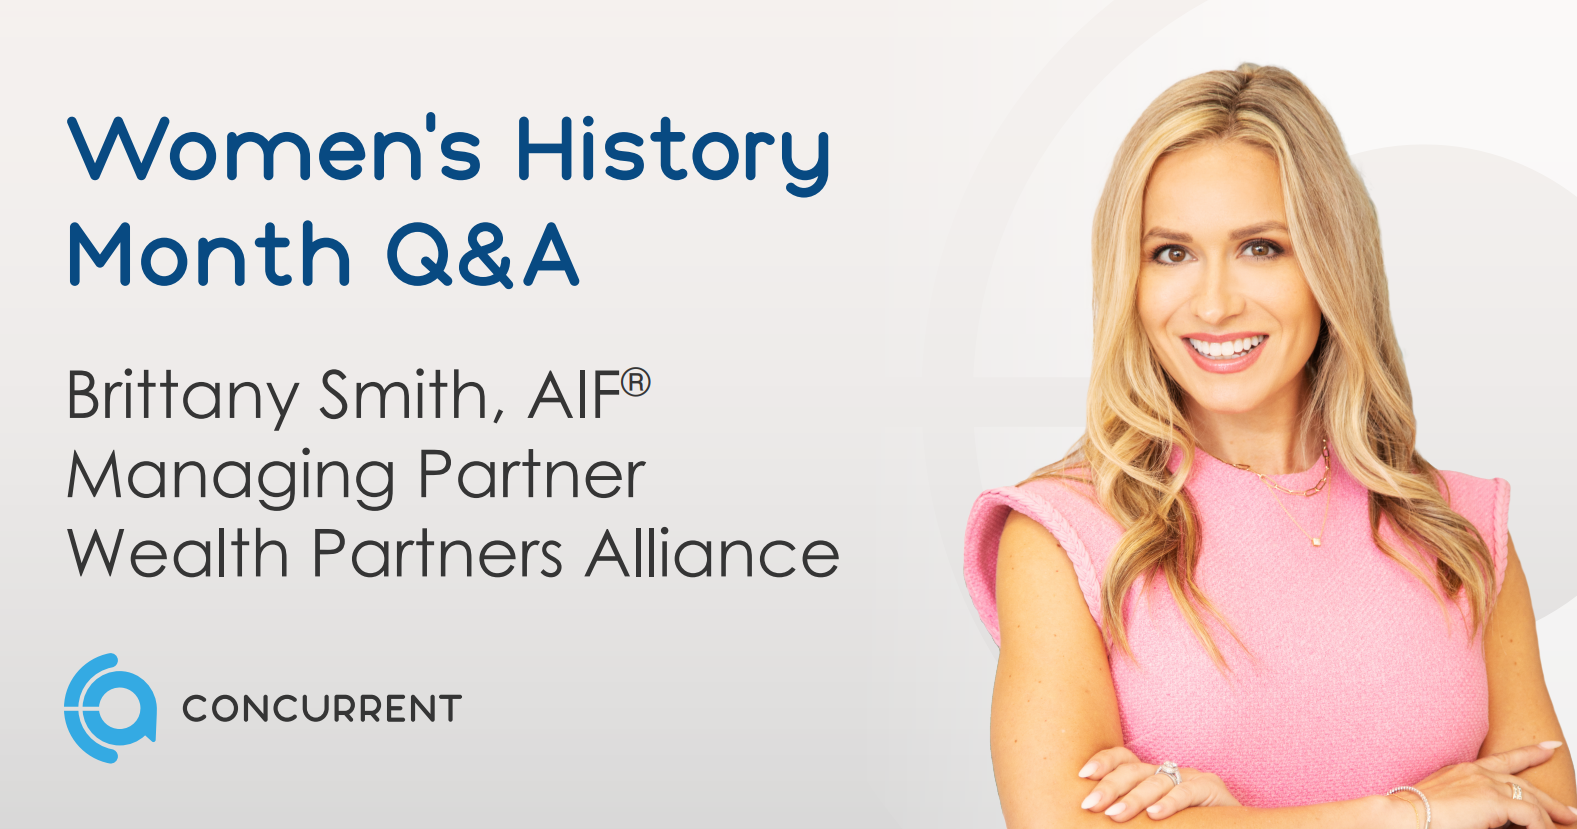 Women’s History Month Q&A with Brittany Smith, Managing Partner